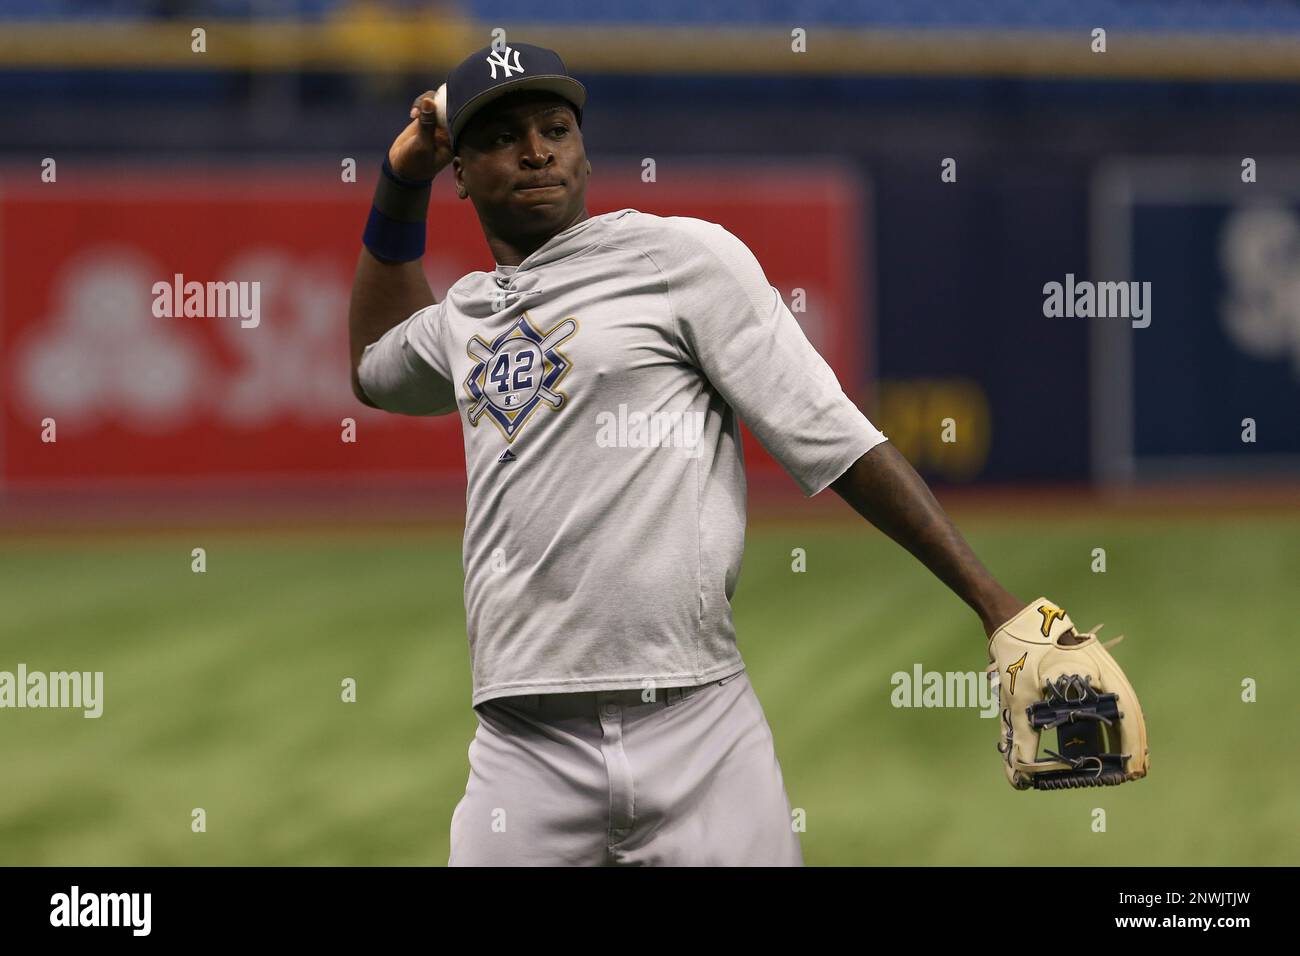 ST. PETERSBURG, FL - SEPTEMBER 26: New York Yankees shortstop Didi Gregorius (18) before the regular season MLB game between the New York Yankees and Tampa Bay Rays on September 26, 2018 at Tropicana Field in St. Petersburg, FL. (Photo by Mark LoMoglio/Icon Sportswire) (Icon Sportswire via AP Images) Stock Photo